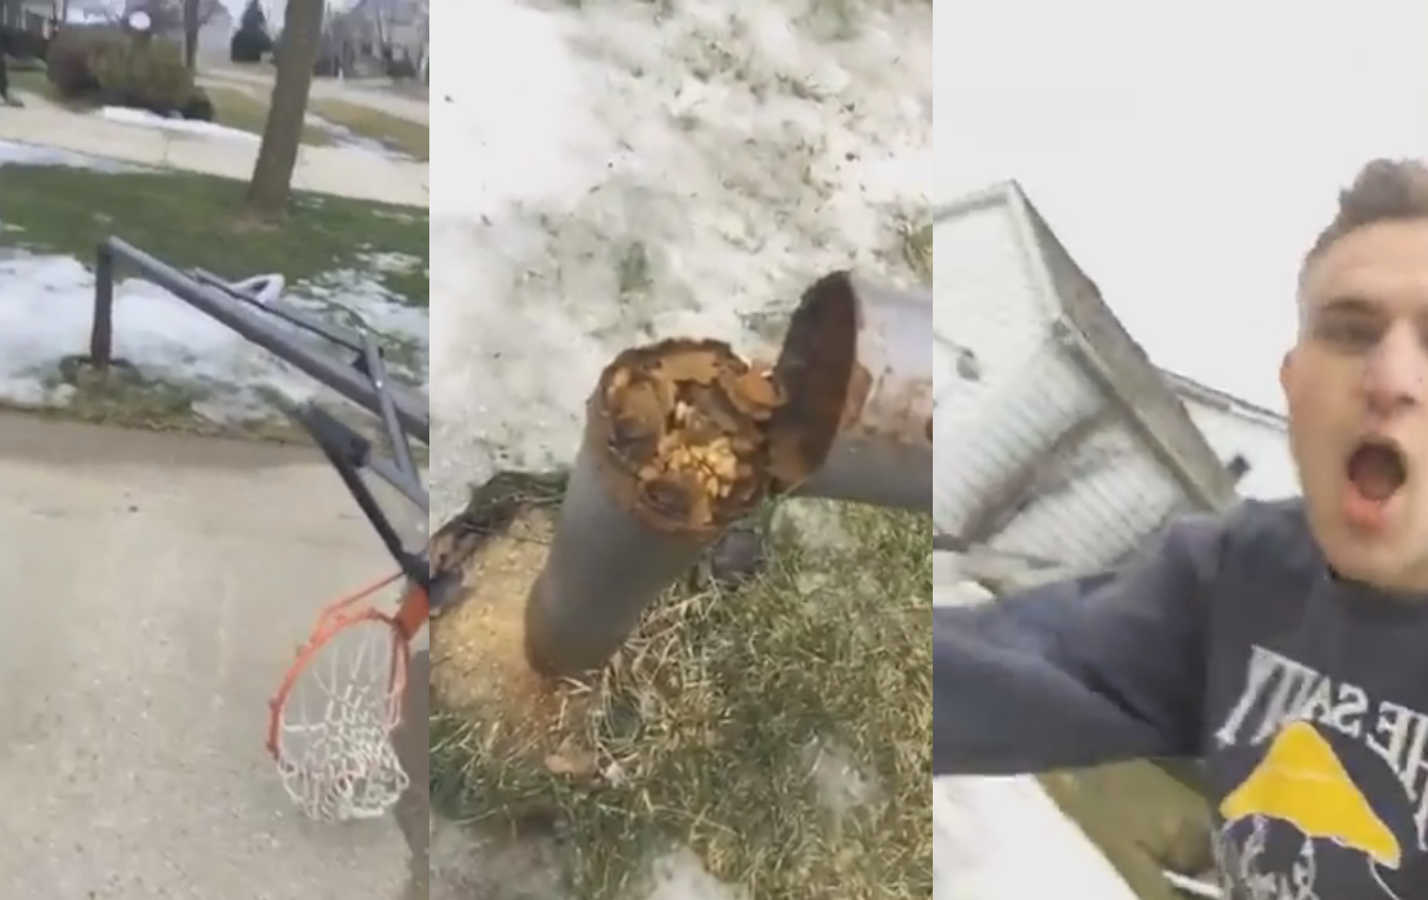 Wind Breaks a Man's Basketball Hoop and He Gets Real Mad